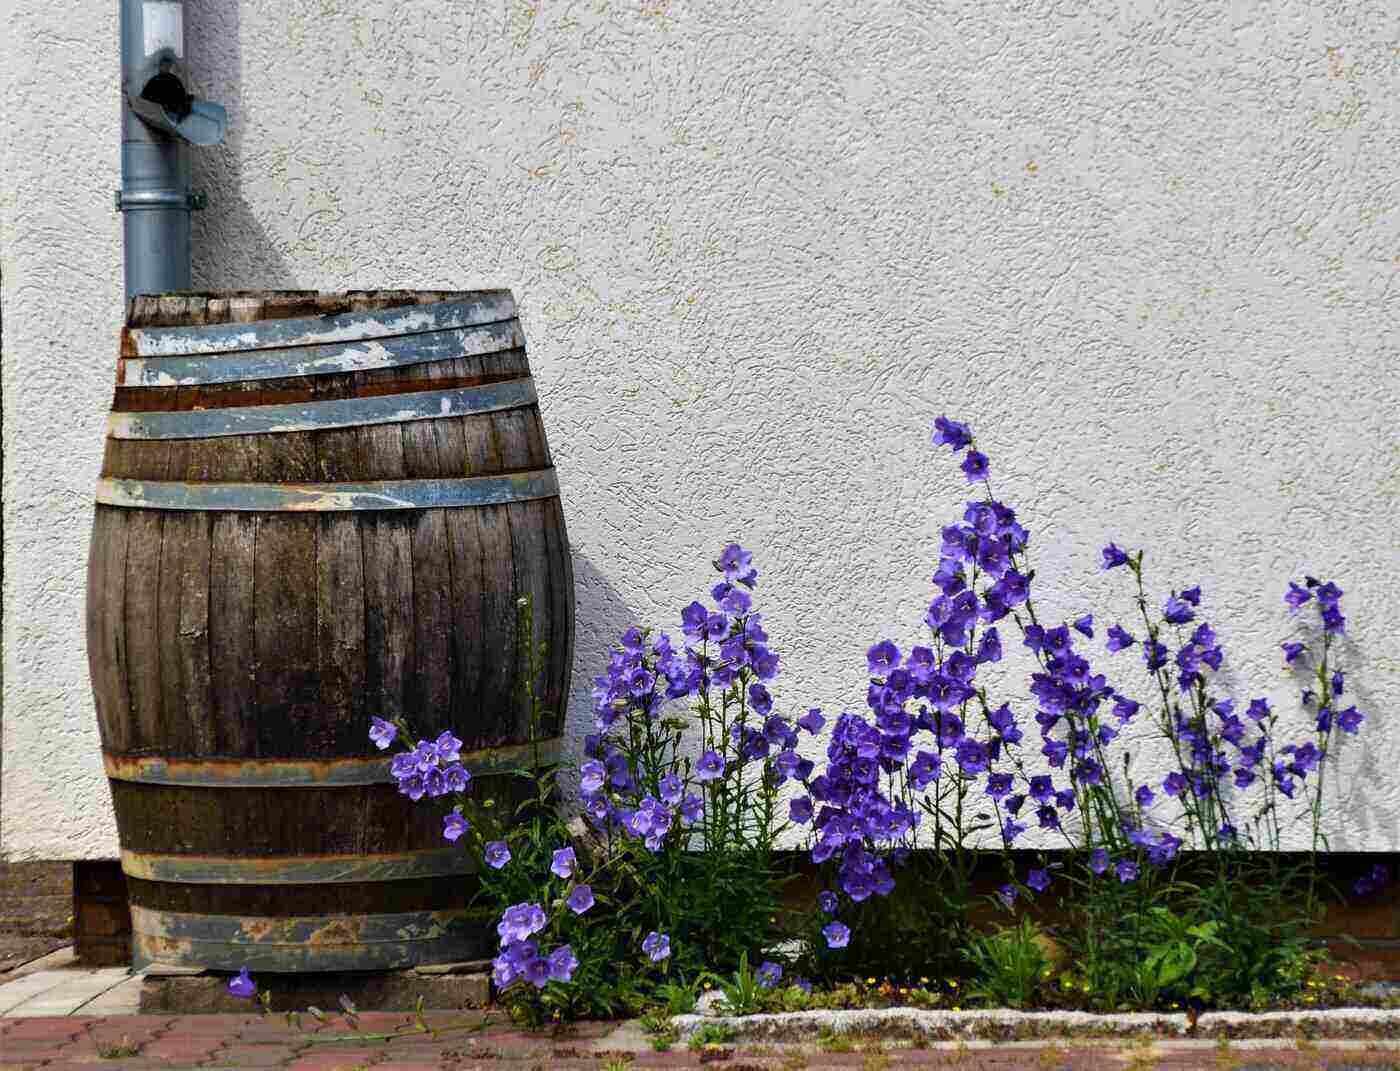 rain barrel and purple flowers - how to conserve water and recycle it for your garden